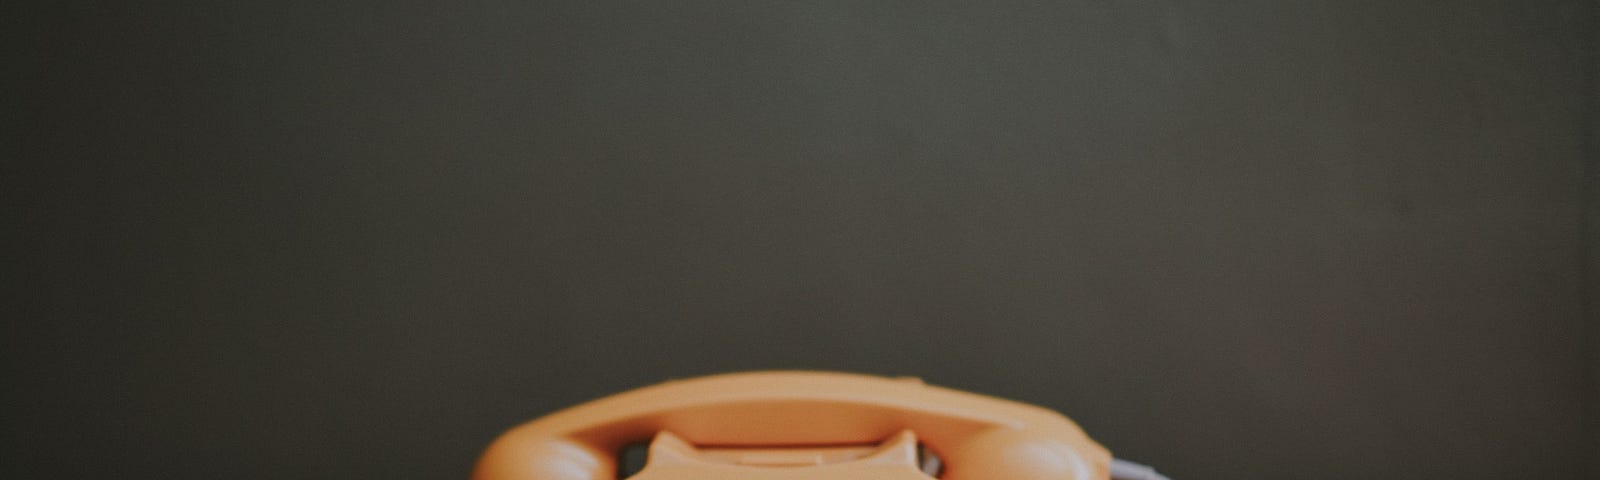 An orange rotary phone sitting on a wooden table in front of a dark gray-green wall